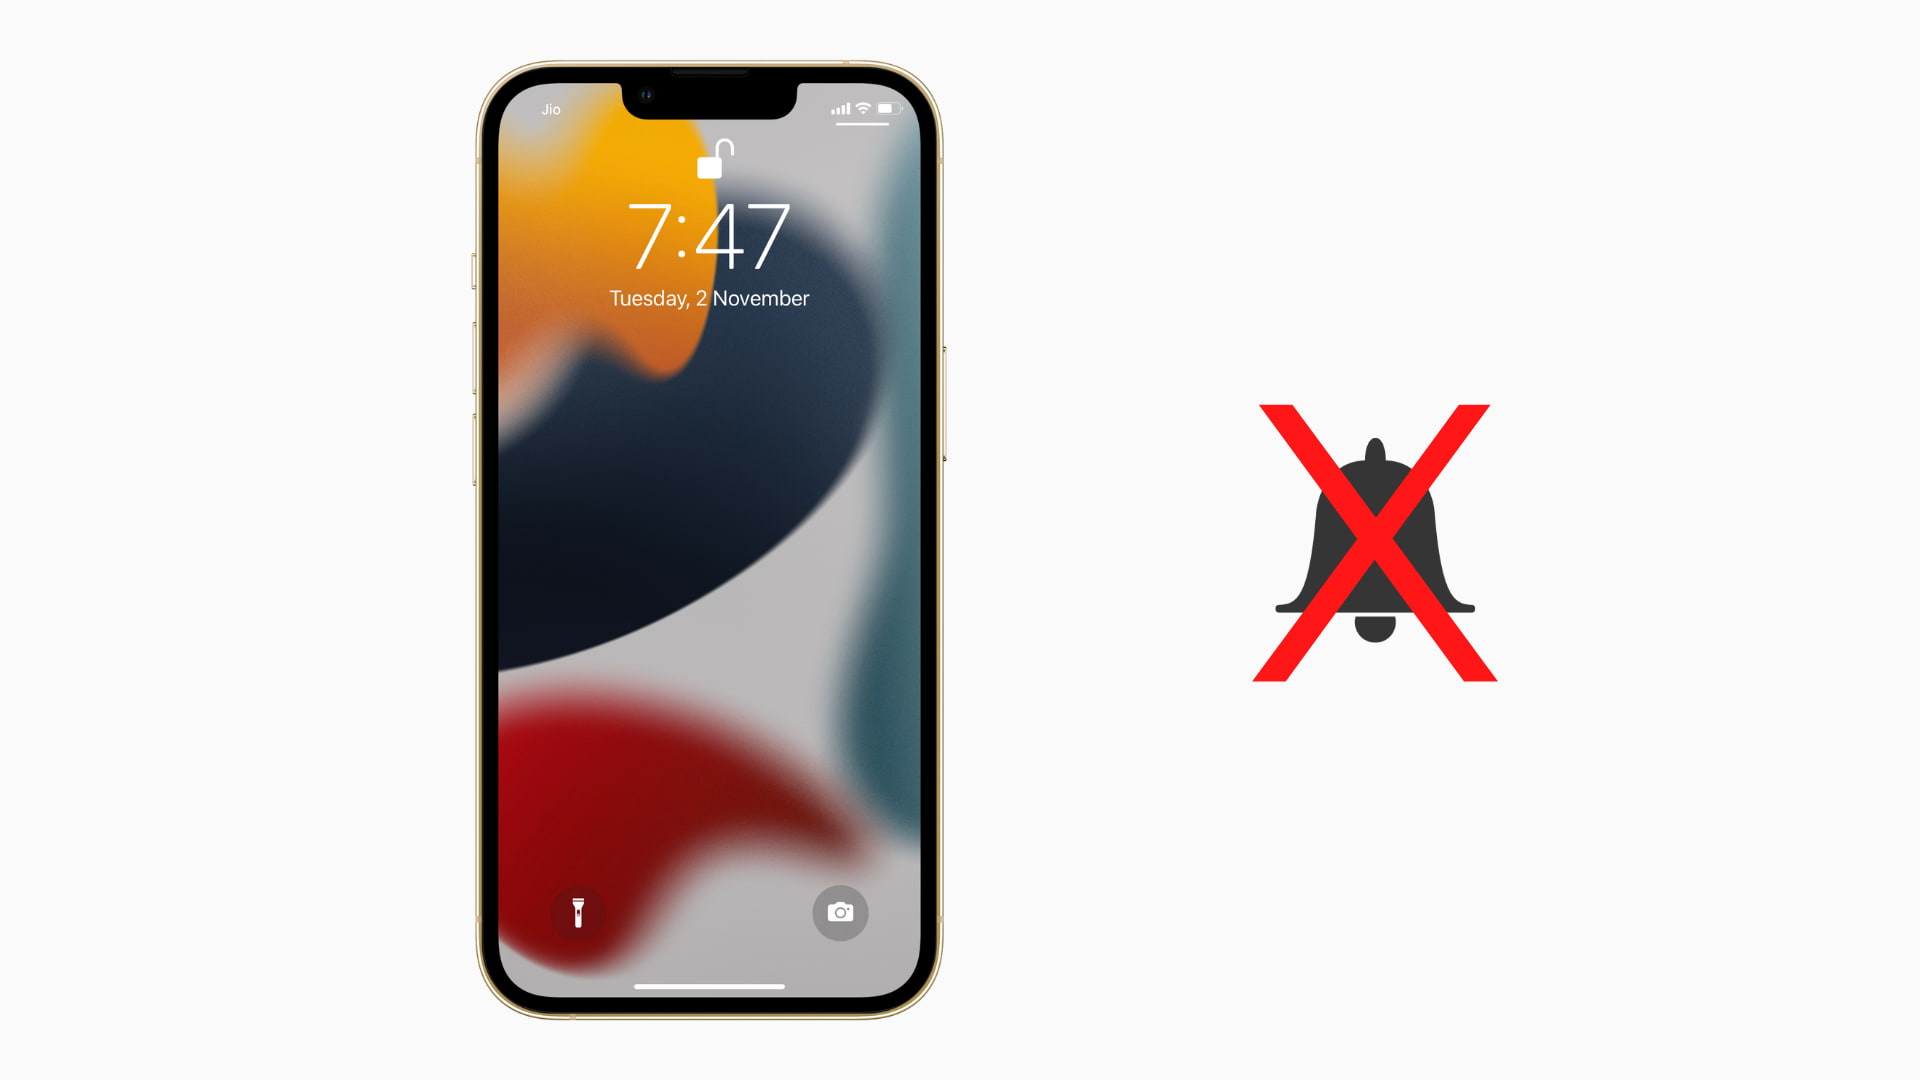 Fix for not getting notifications on iPhone